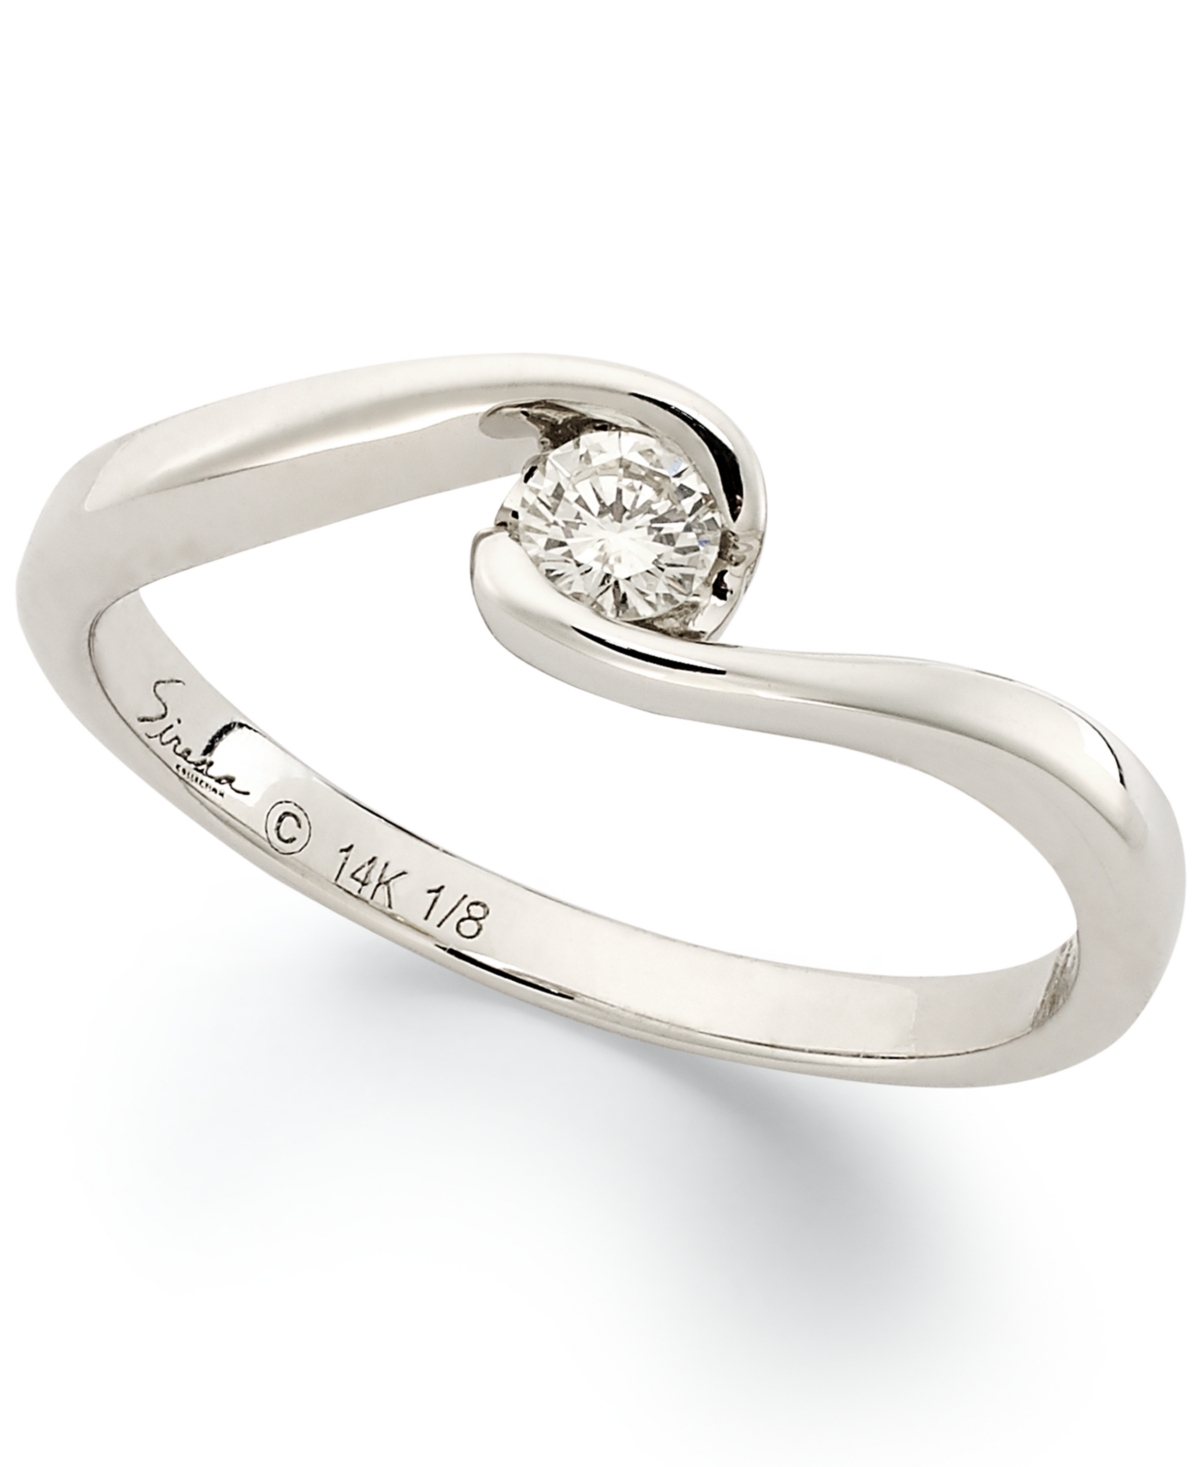 Diamond (1/8 ct. t.w.) Engagement Ring in 14k White Gold - White Gold